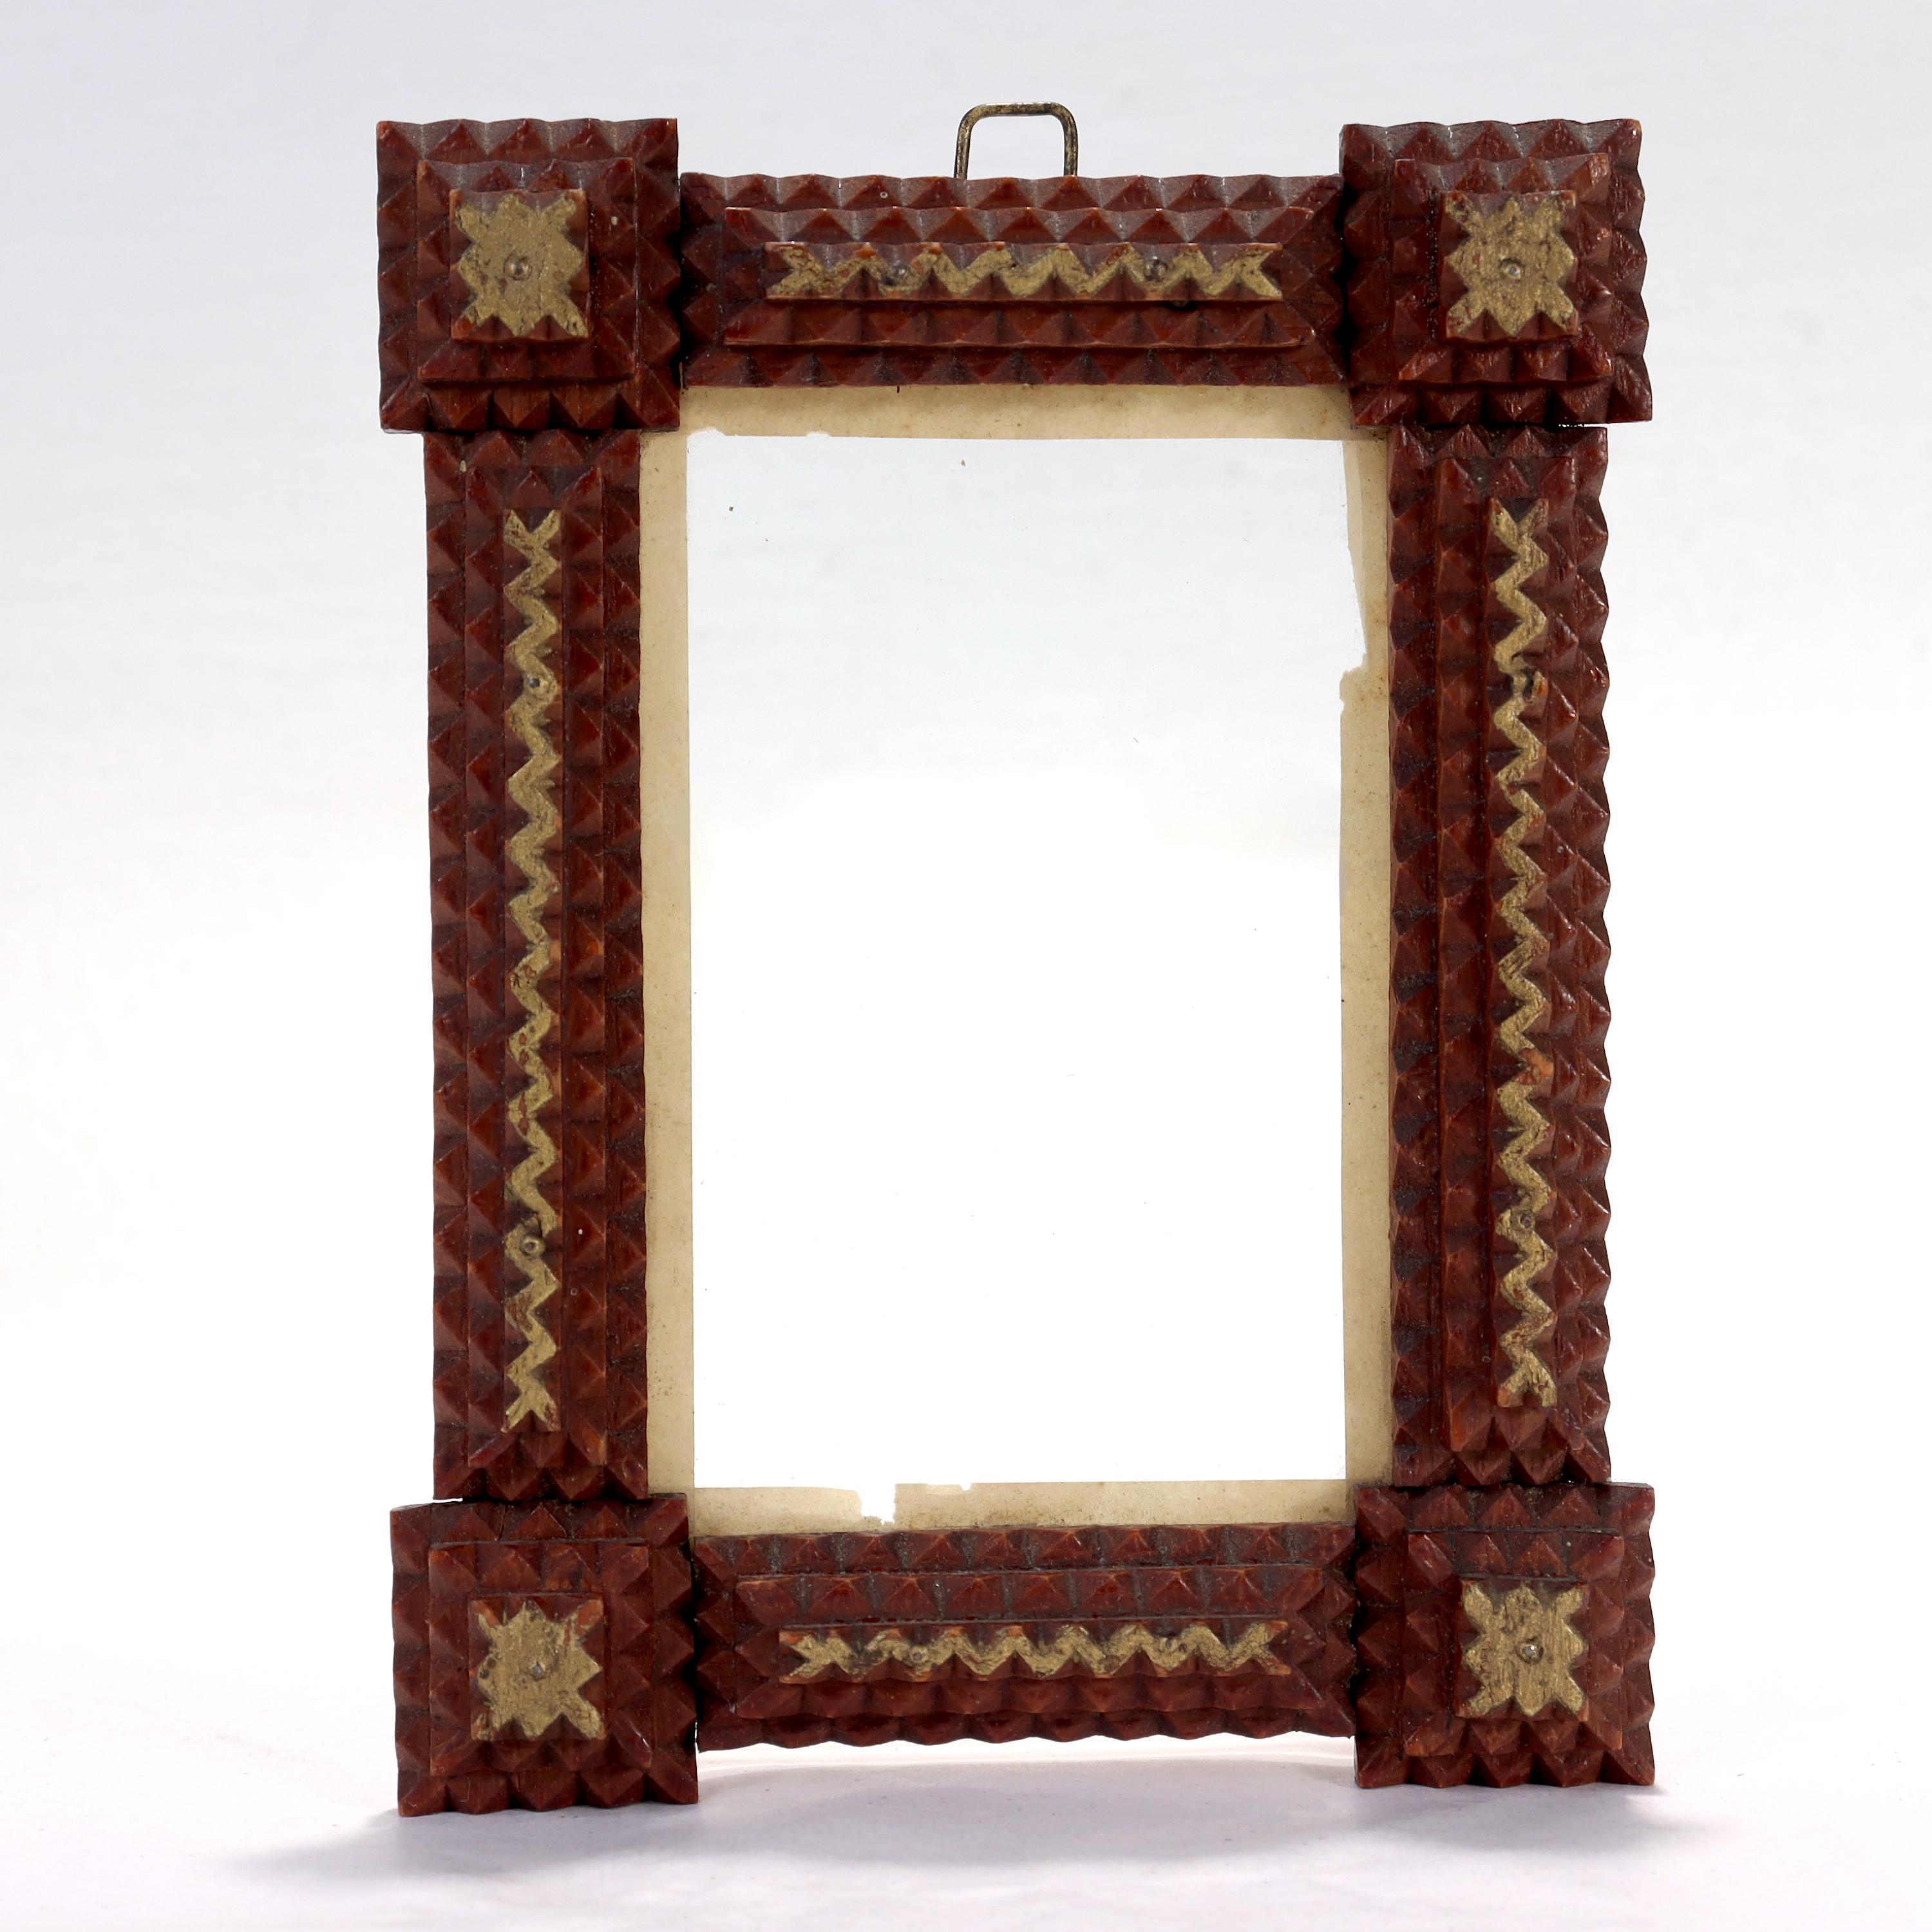 A fine diminutive Tramp Art picture frame.

With a crazed red wash and gold highlights.

Found in a Pennsylvania estate.

Simply a great piece of folk art! 

Date:
20th Century

Overall Condition:
Not retaining glass or a back. It is in